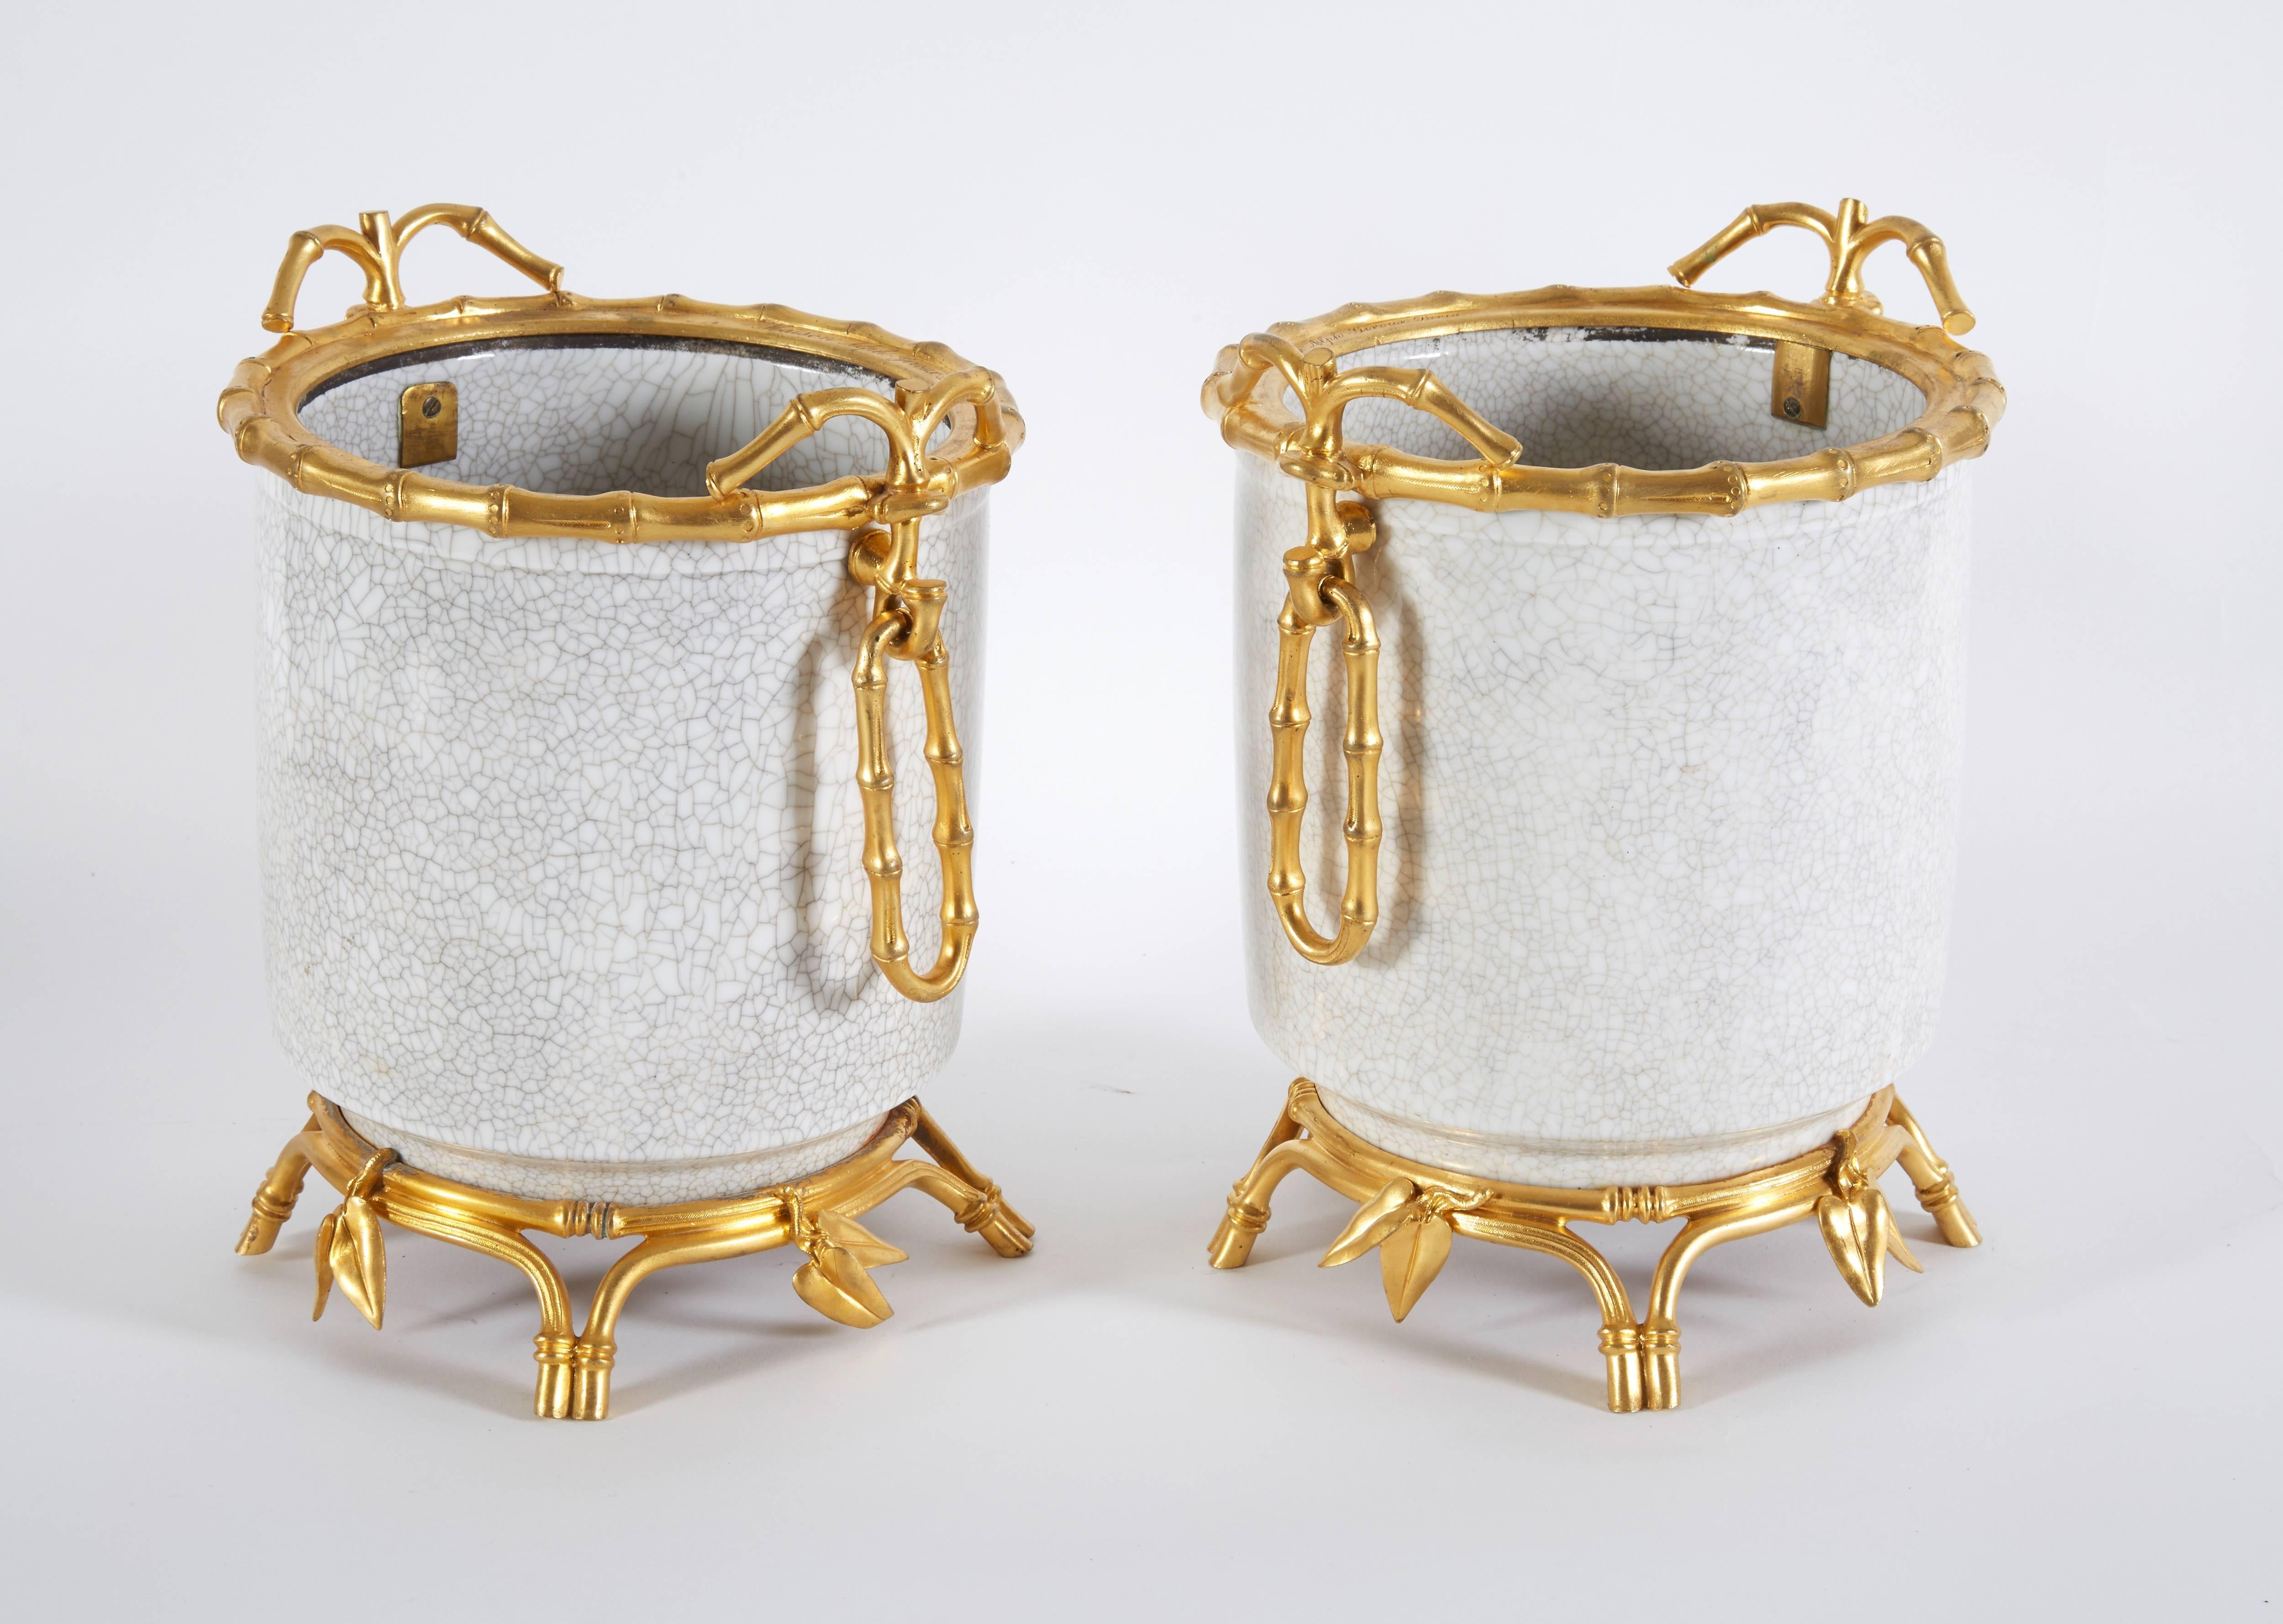 Japonisme French Japonsime Ormolu-Mounted Chinese Crackle Glaze Porcelain Cachepots, Pair